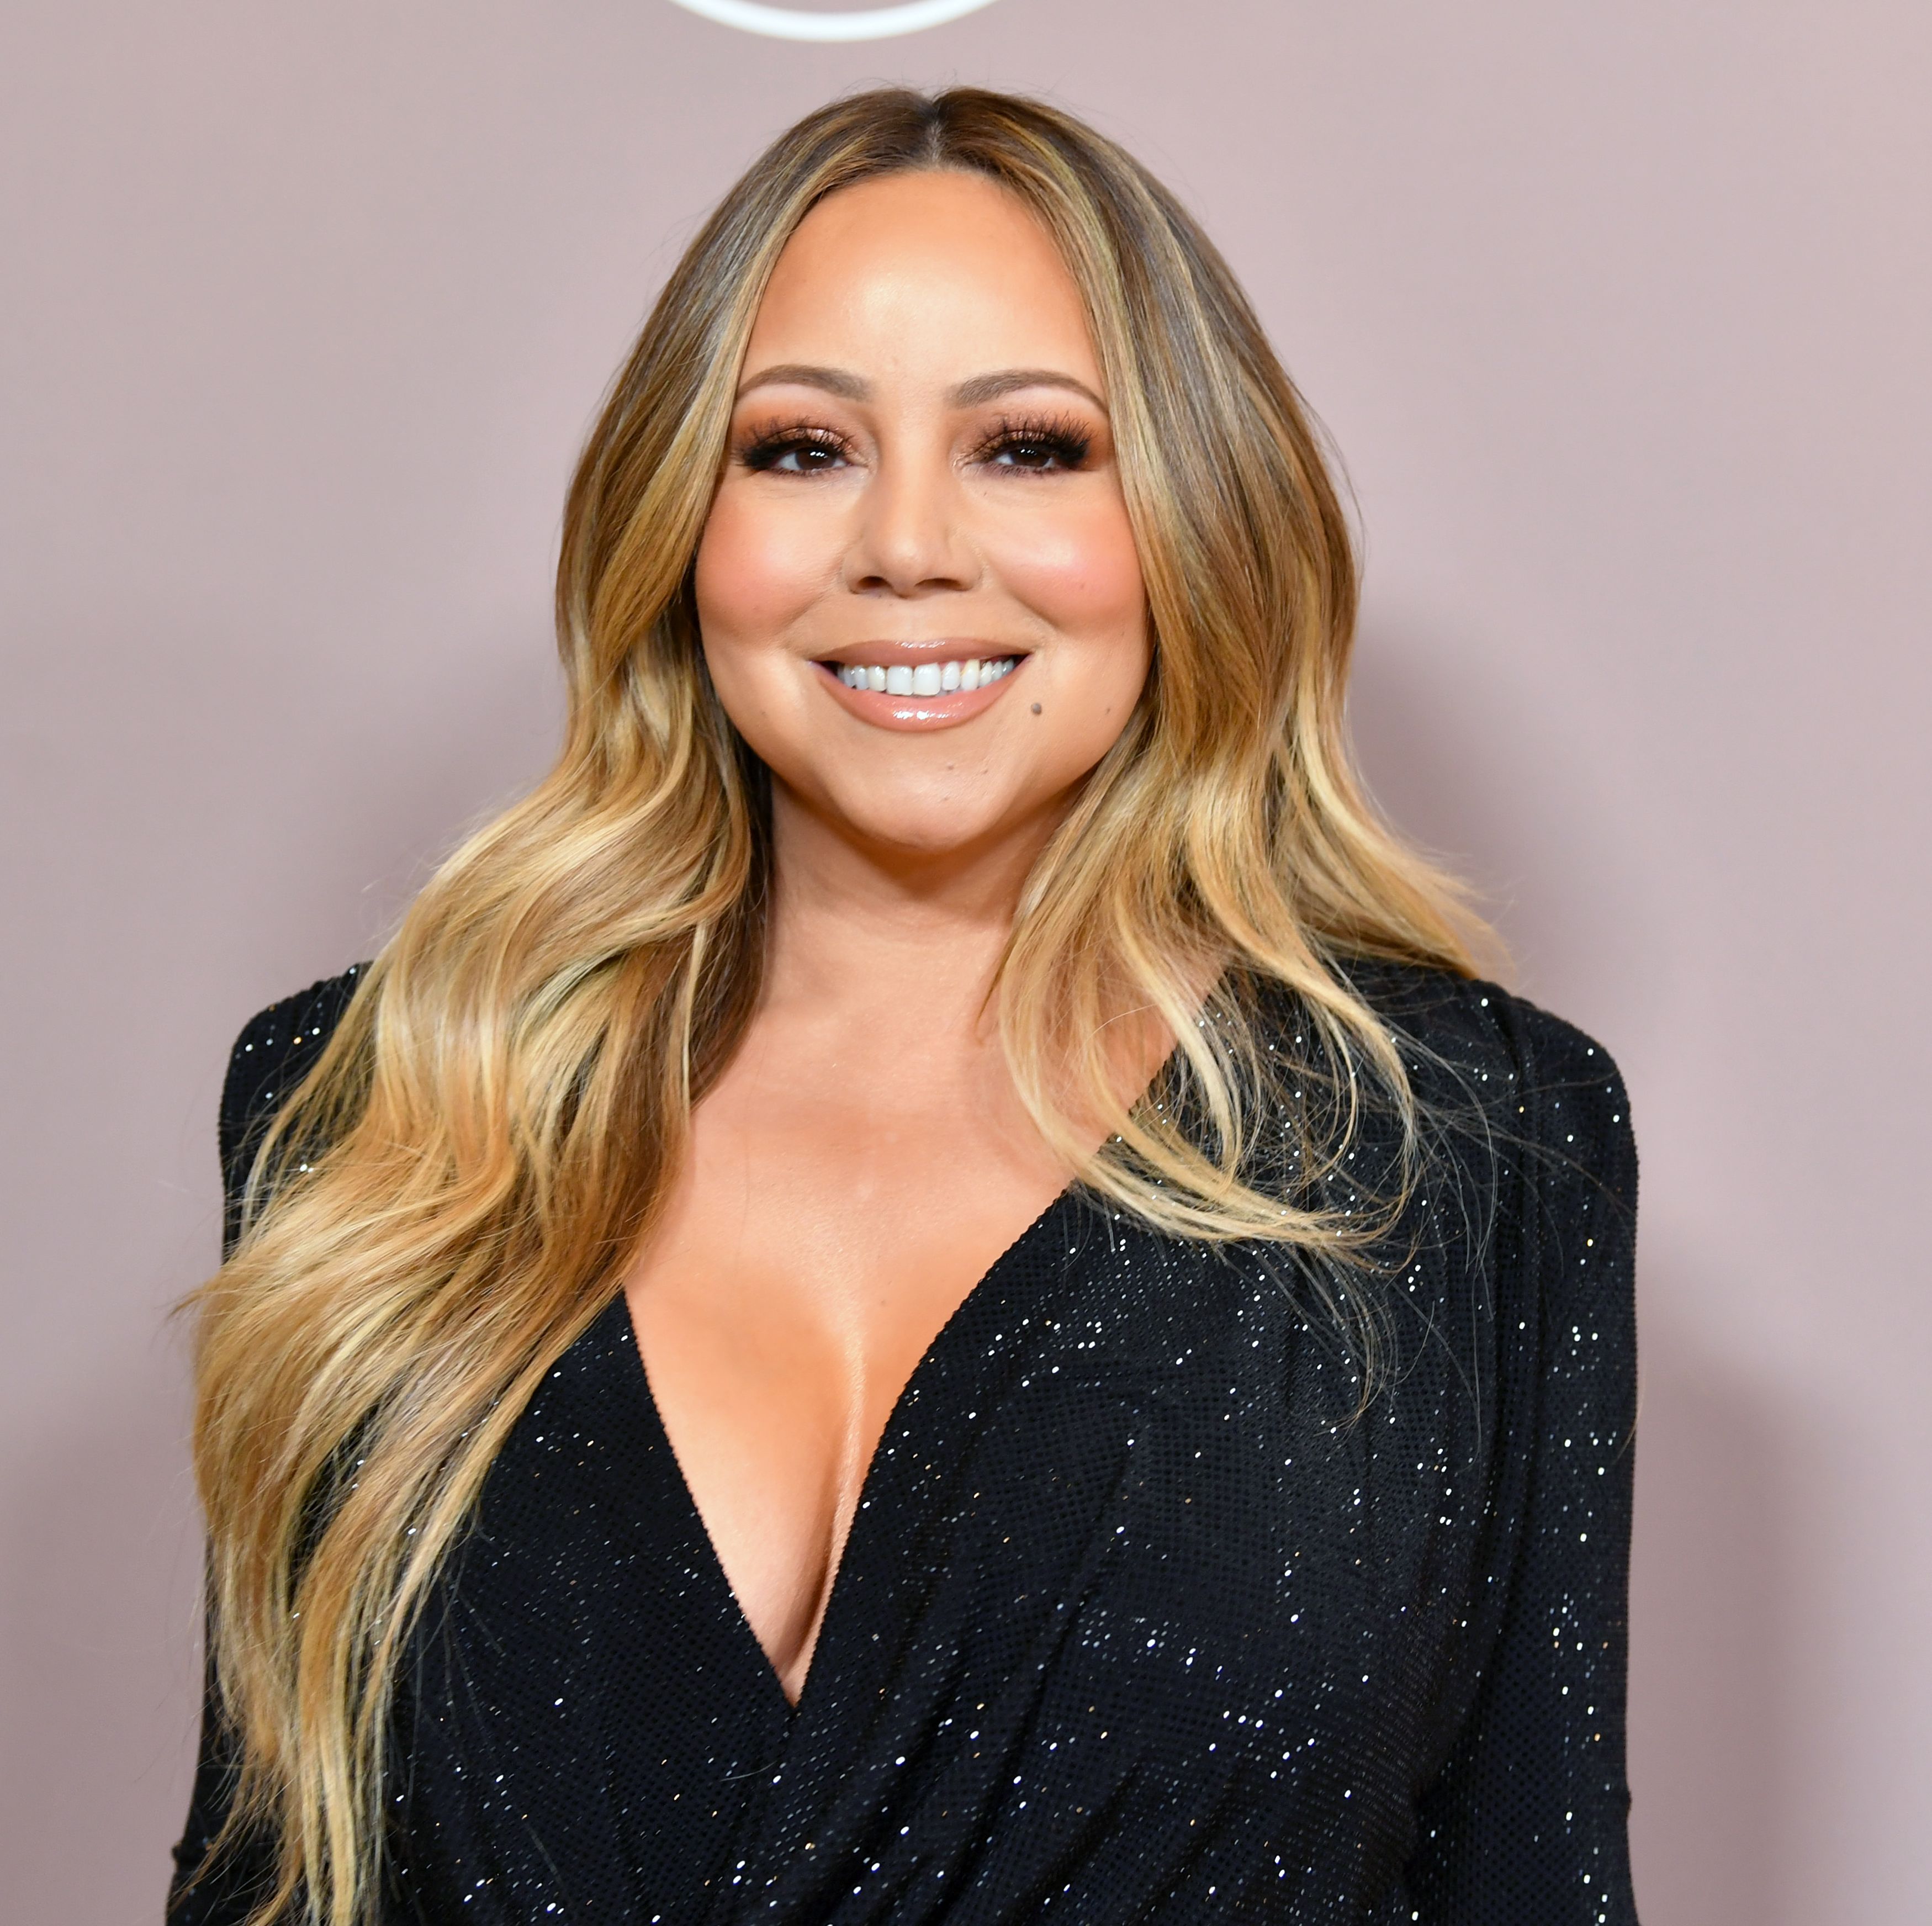 Mariah Carey Dives into the Ocean in a Hot Pink Wetsuit to Celebrate Her 54th Birthday